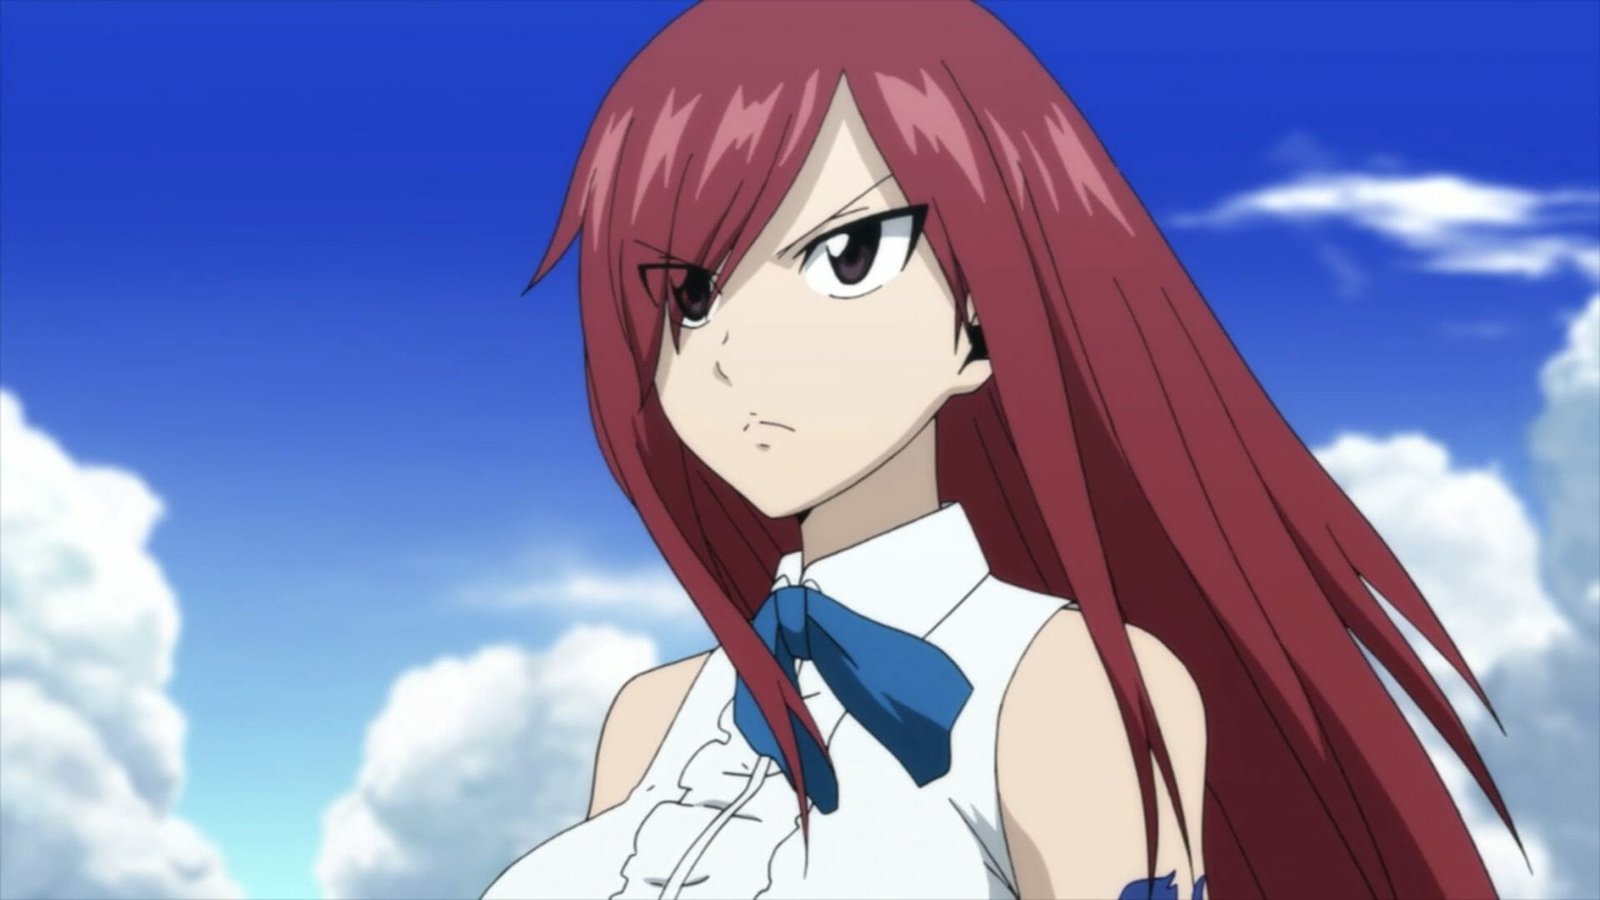 Famous Anime Quote by Erza Scarlet